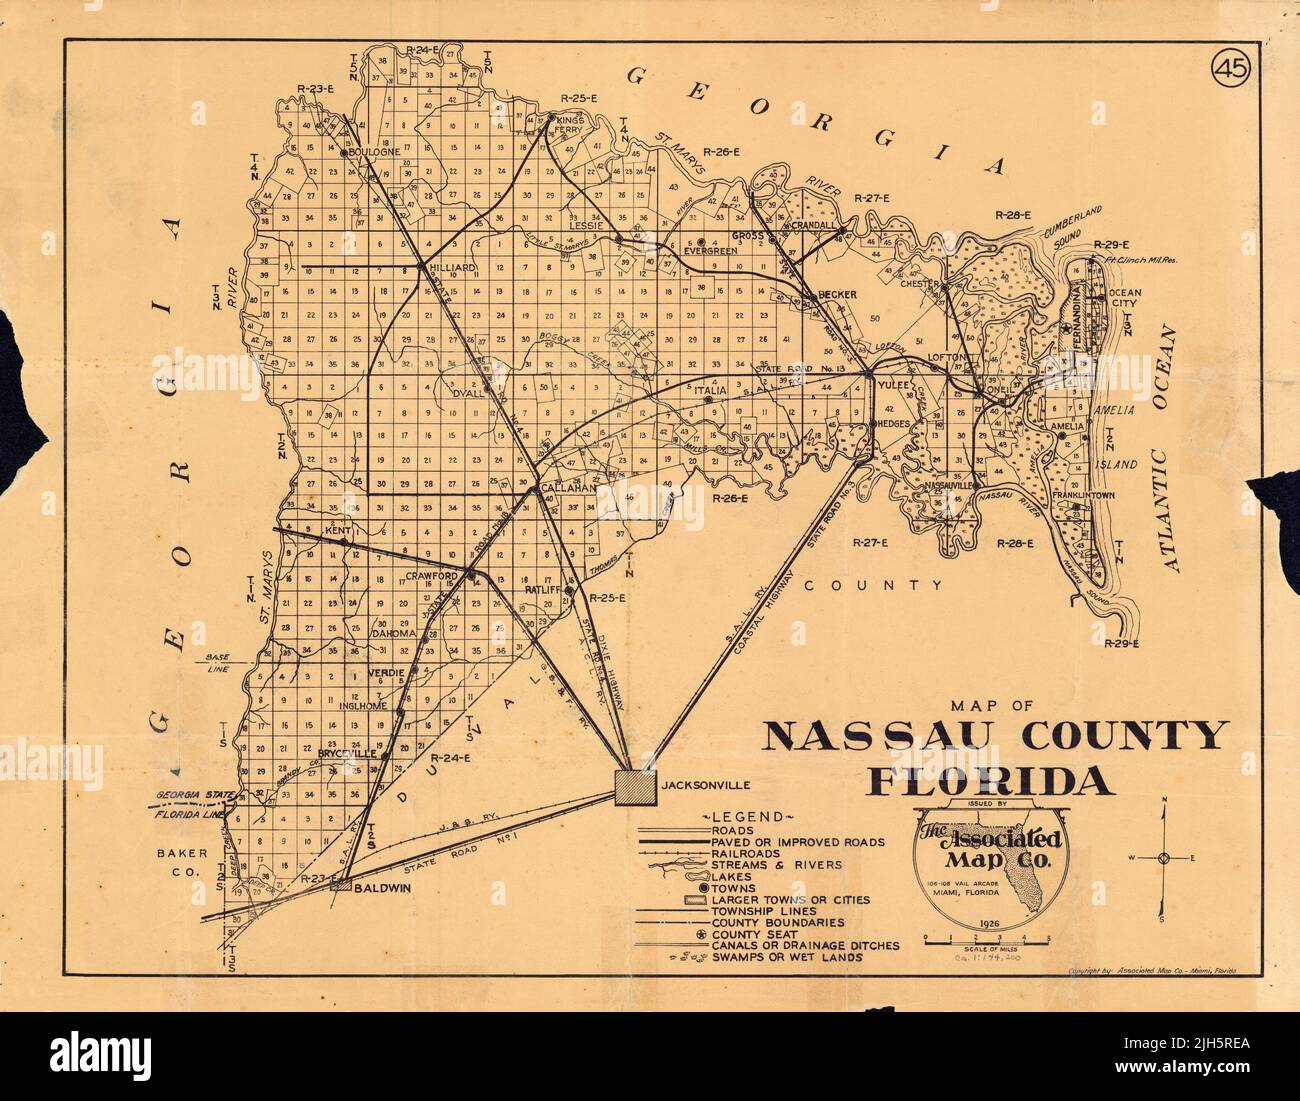 Map of Nassau County, 1926, by the Associated Map Company Stock Photo